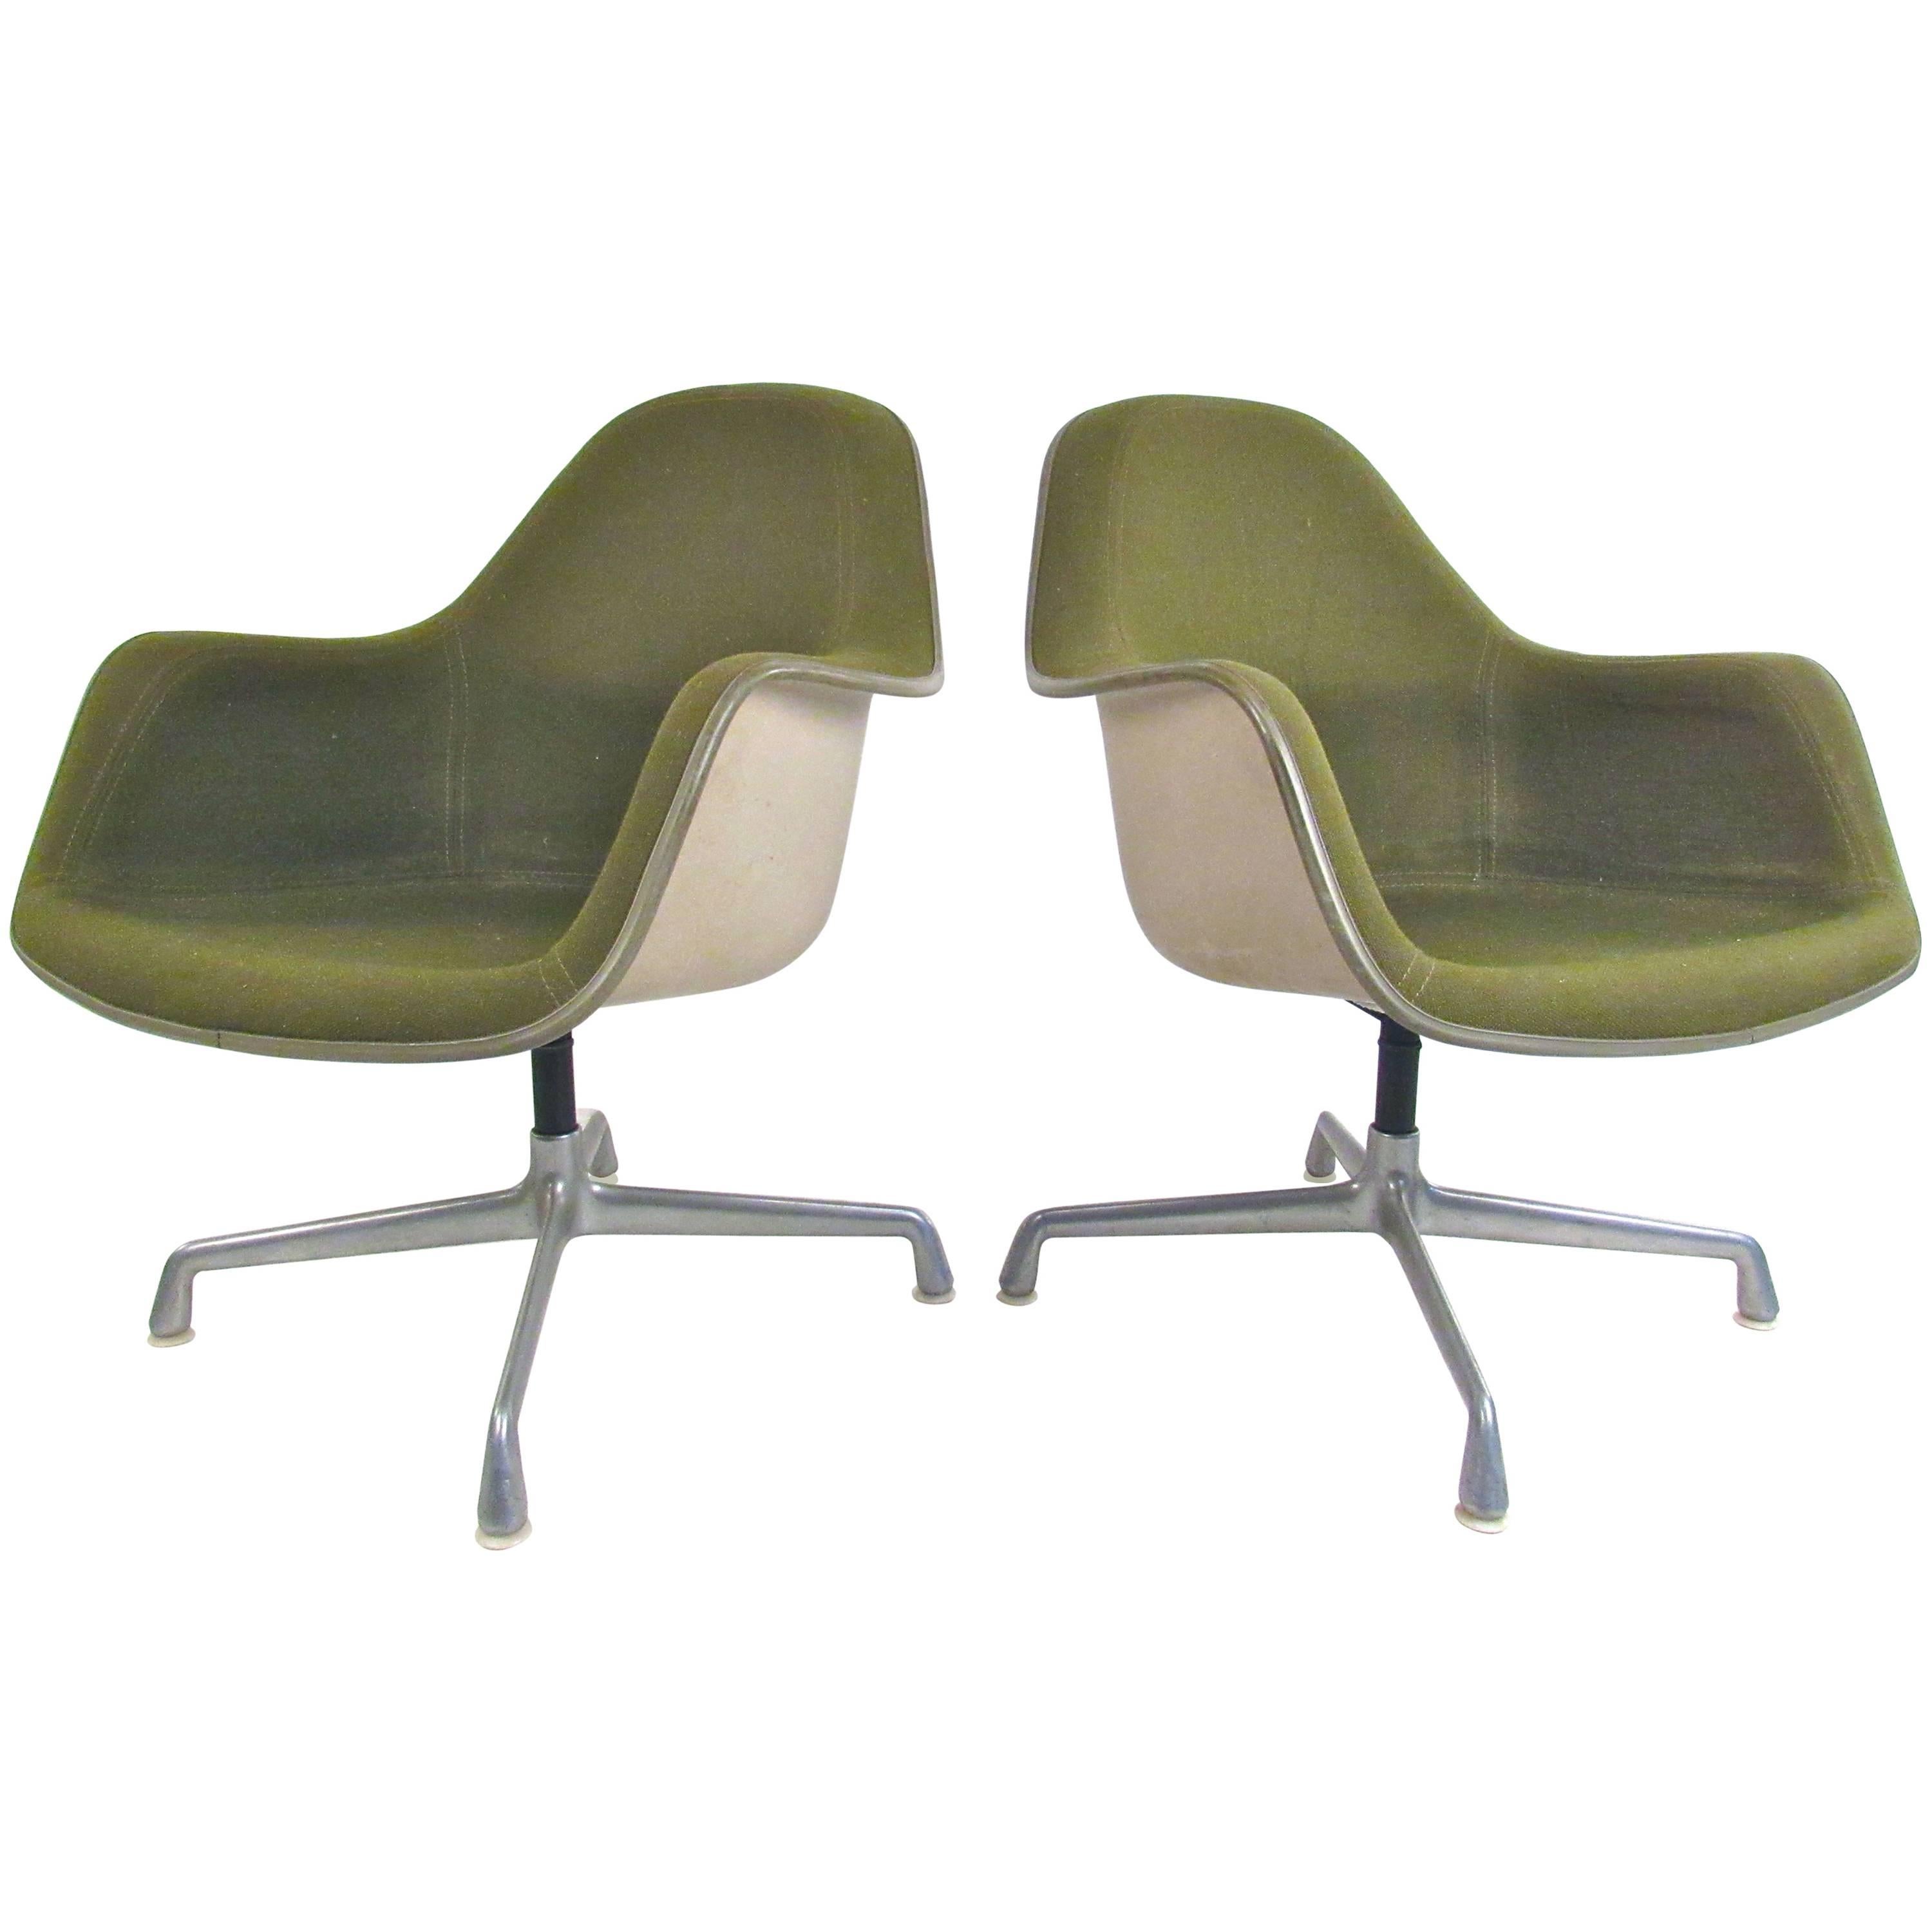 Pair of Mid-Century Herman Miller Swivel Shell Chairs by Charles Eames